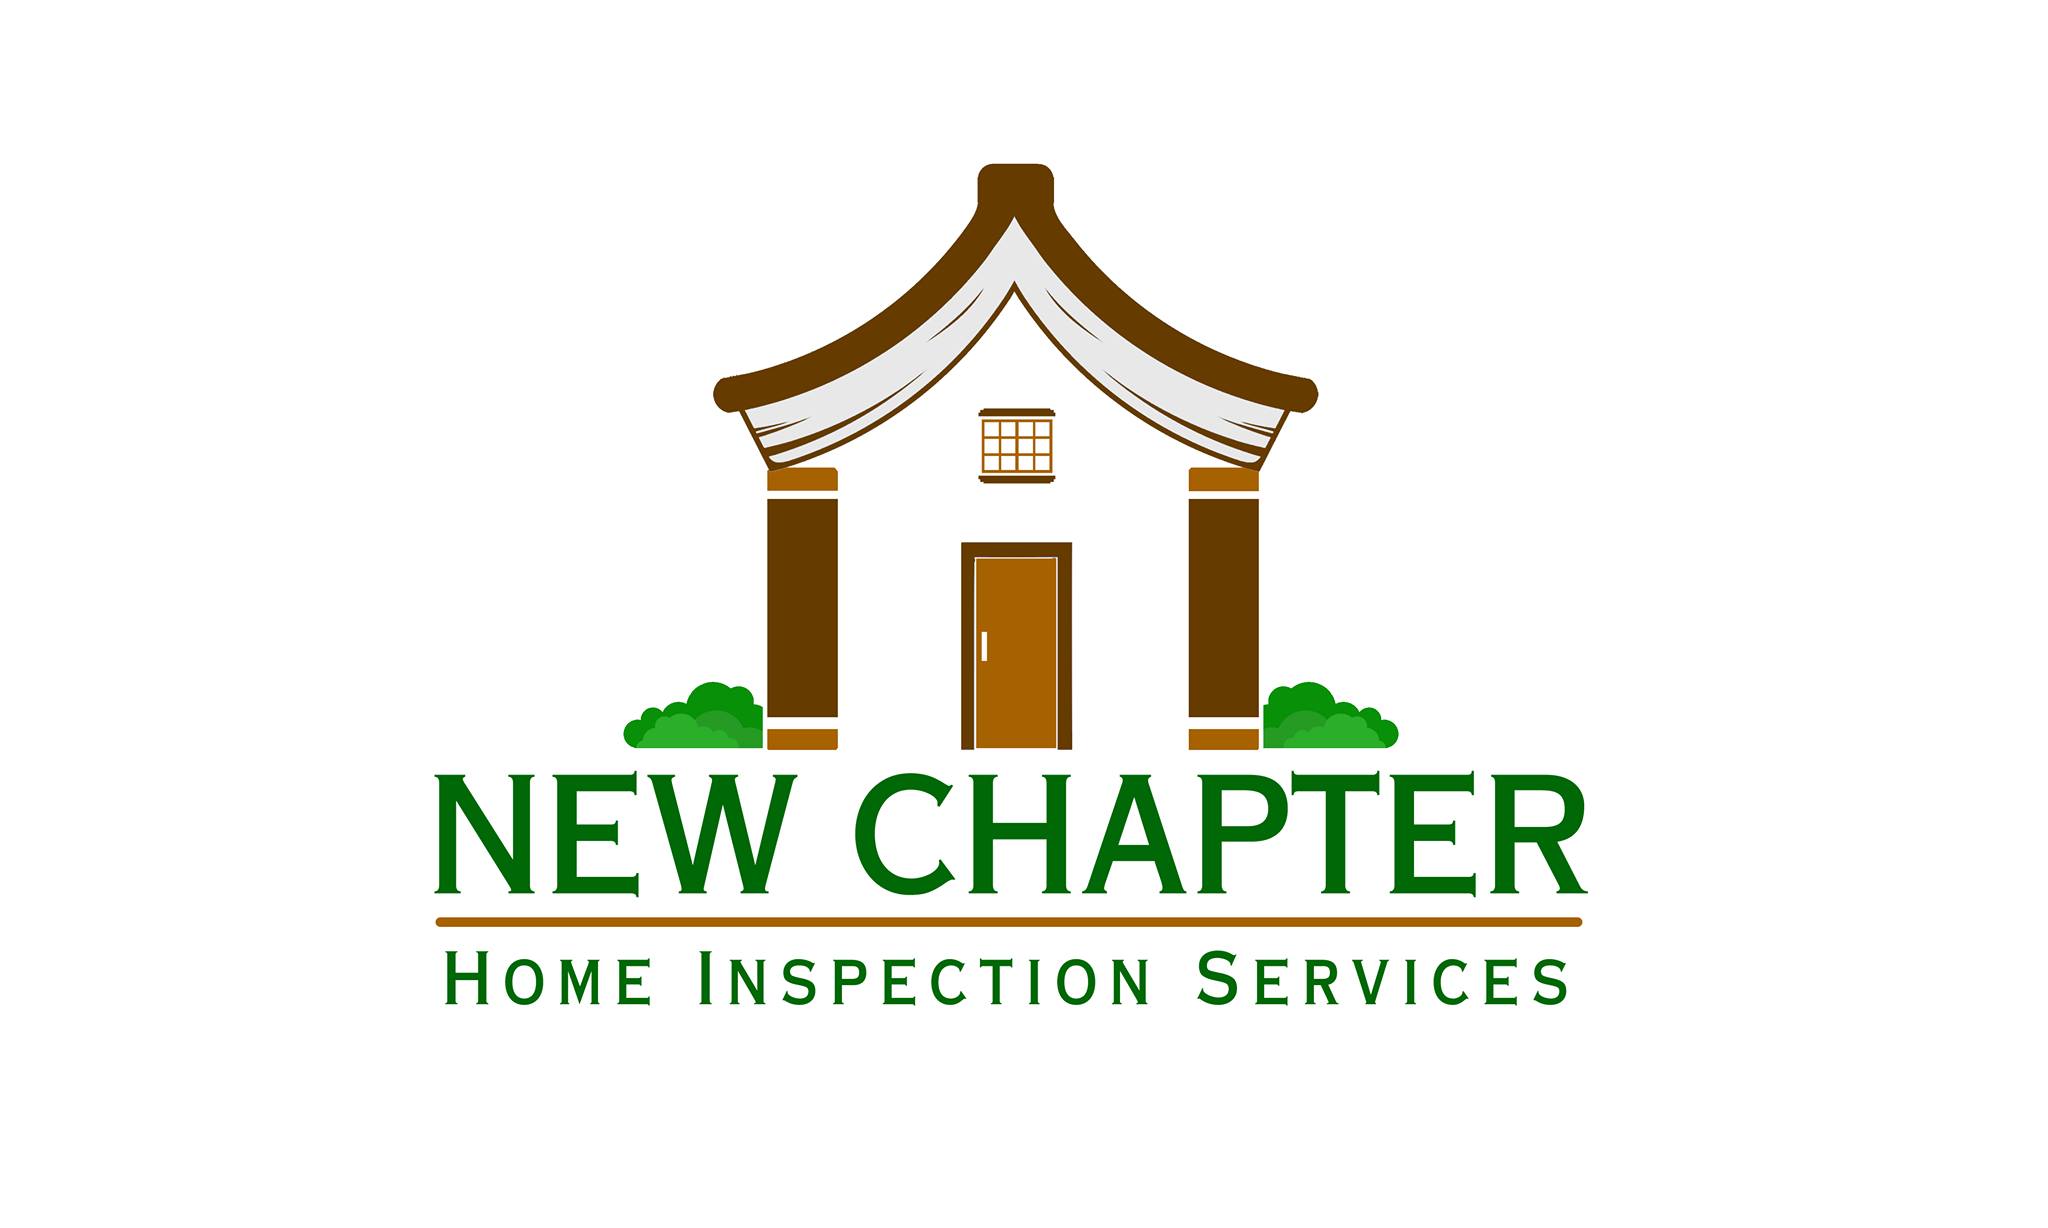 7 Best Home Inspection Services